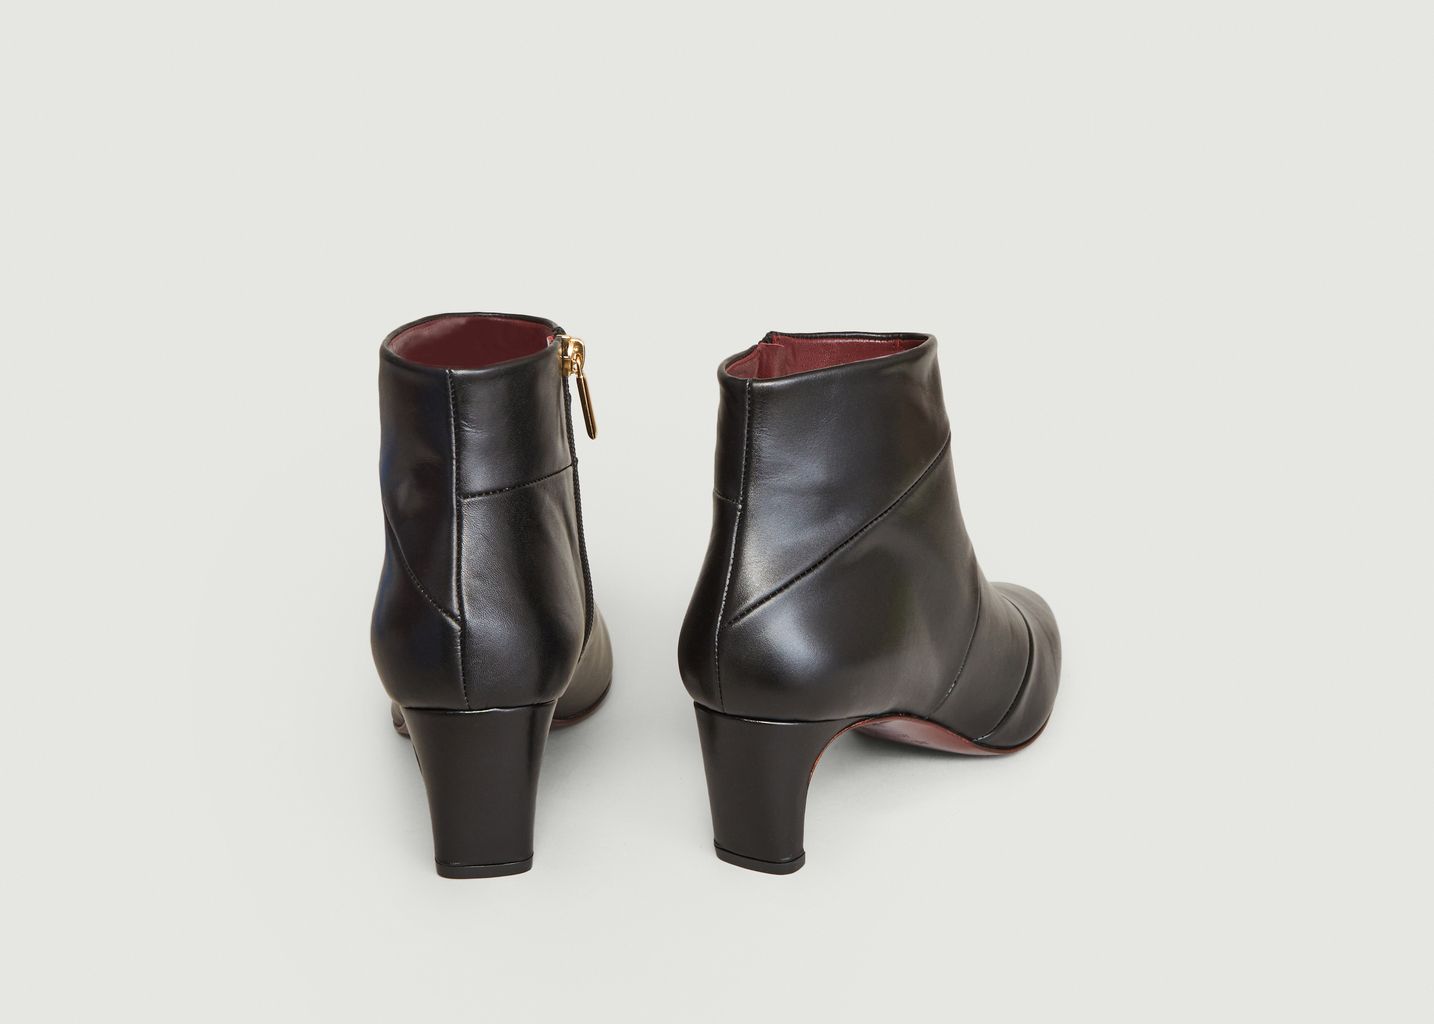 Moune topstitched leather boots - Avril Gau